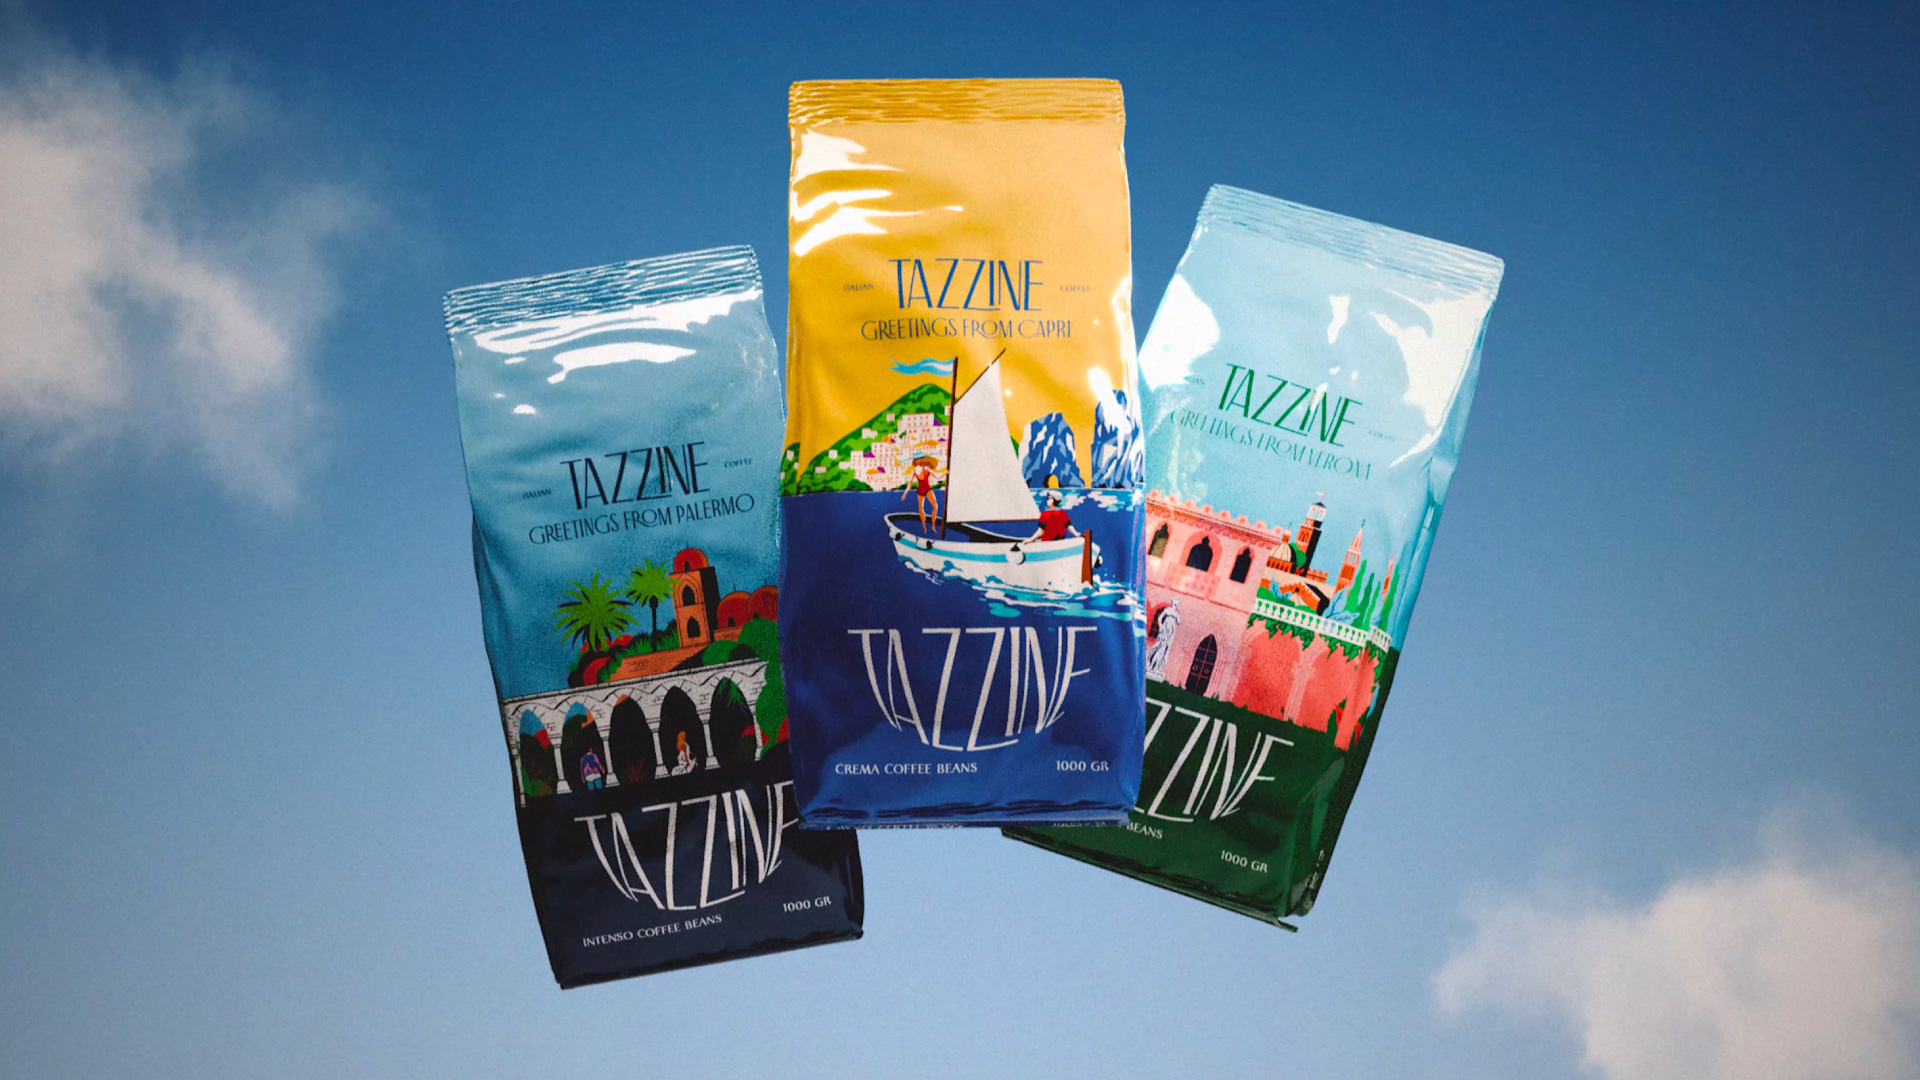 Multiverse Studio Brings Italy to Life with Tazzine Coffee Branding